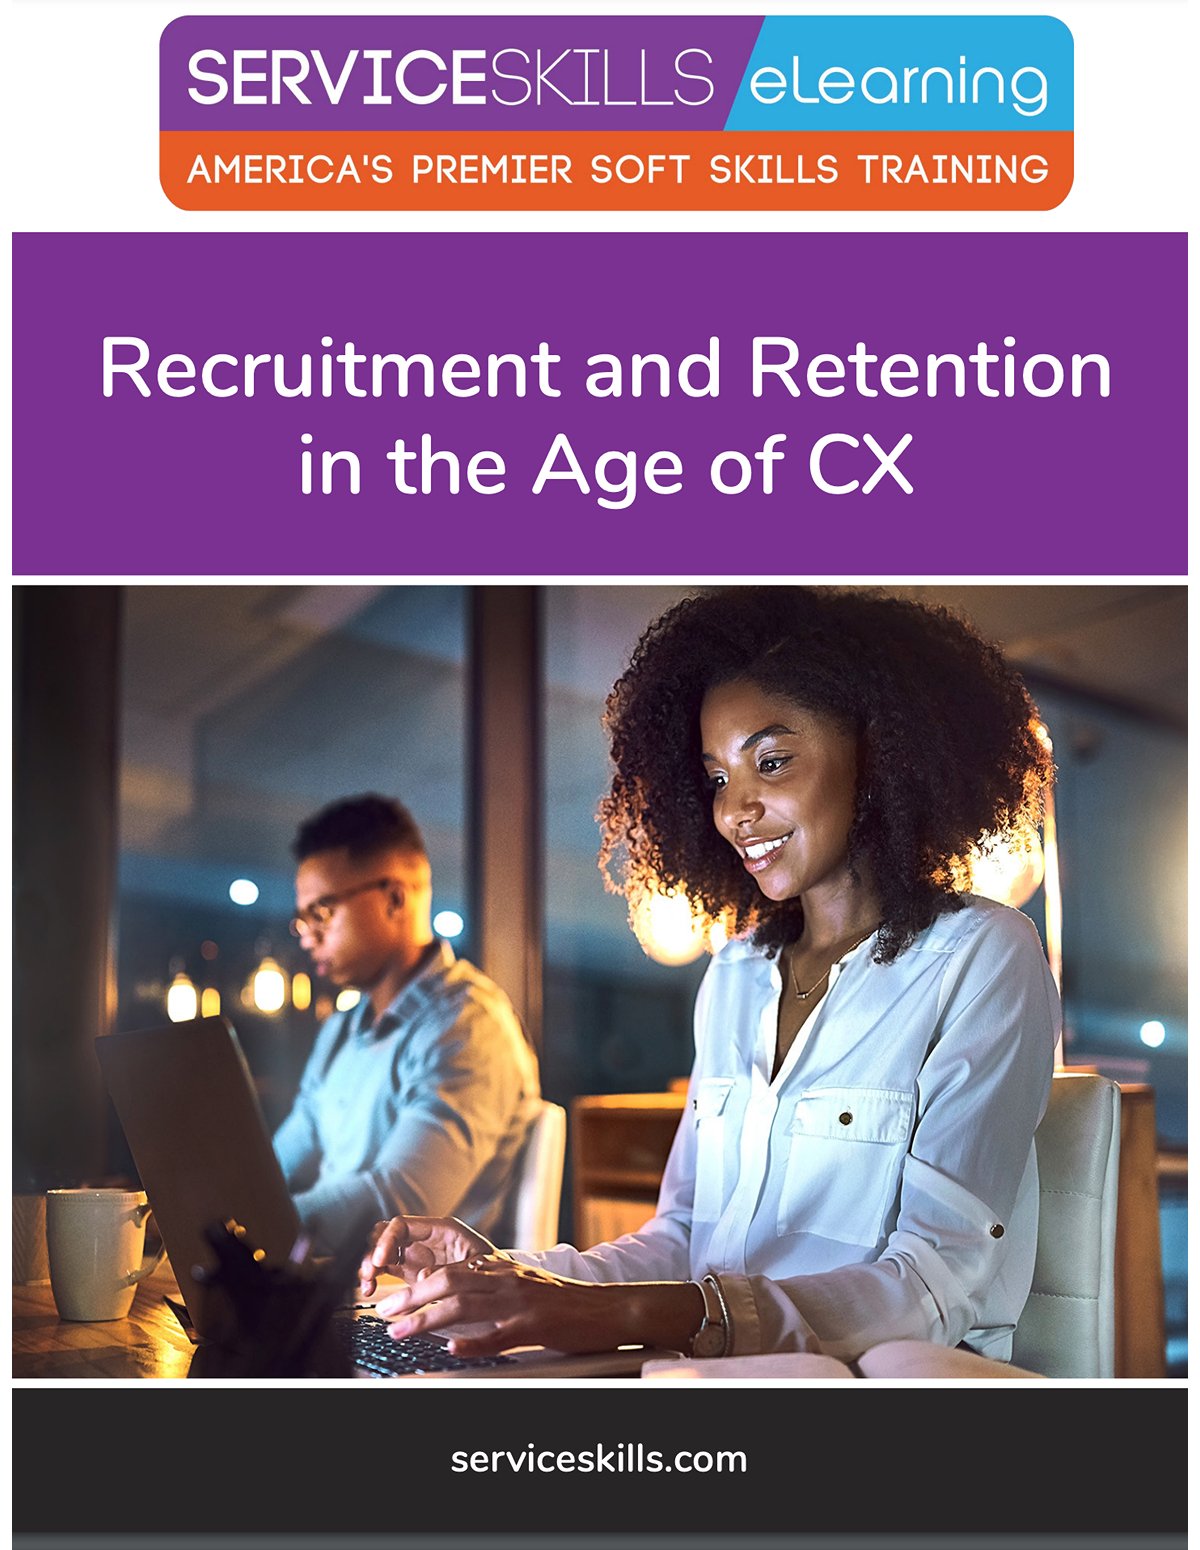 Recruitment and Retention in the Age of Customer Experience White Paper